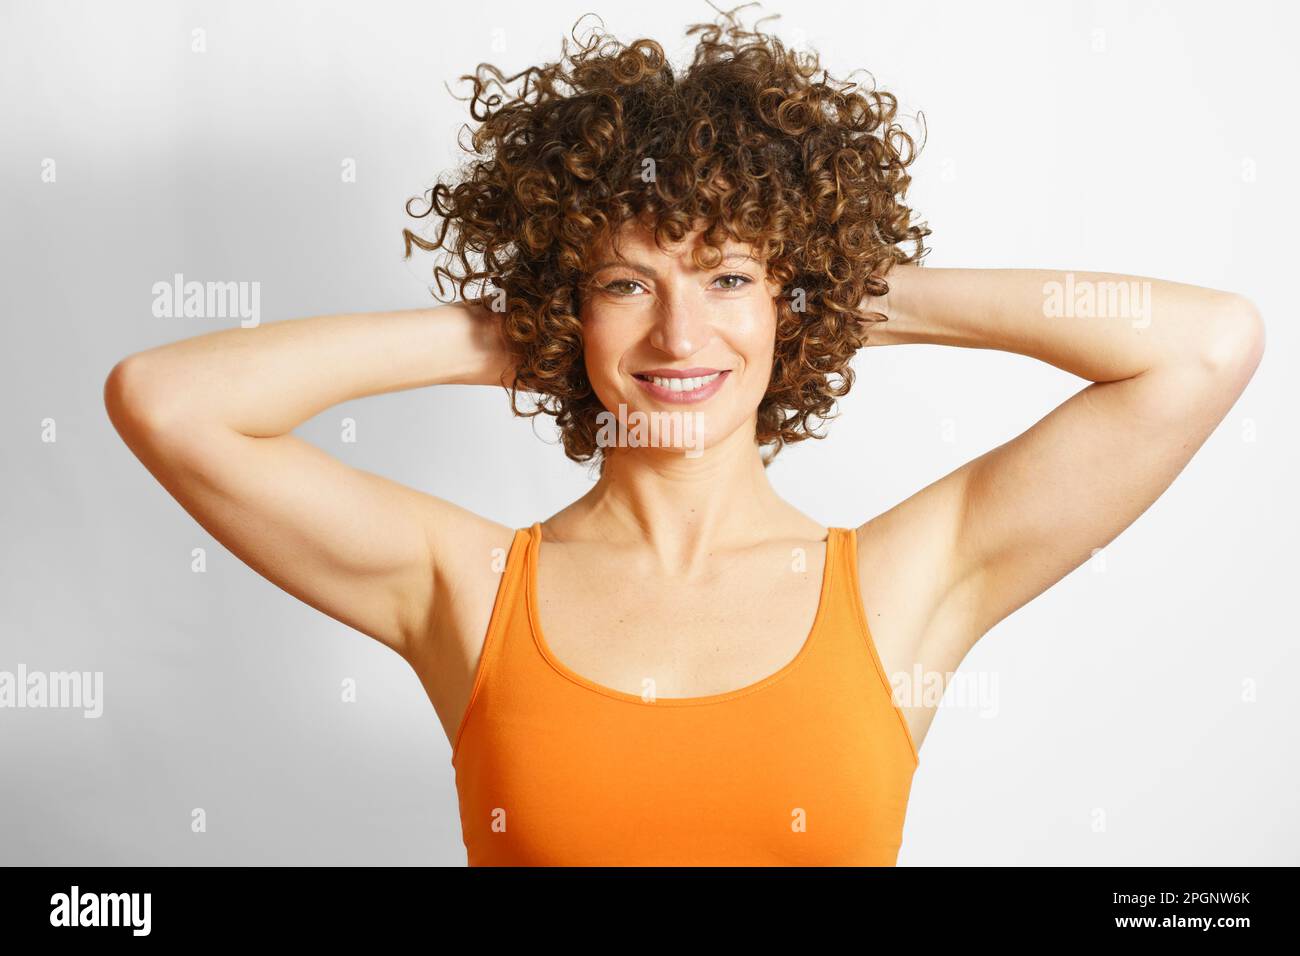 Smiling curly haired woman standing with hands behind hair against white background Stock Photo